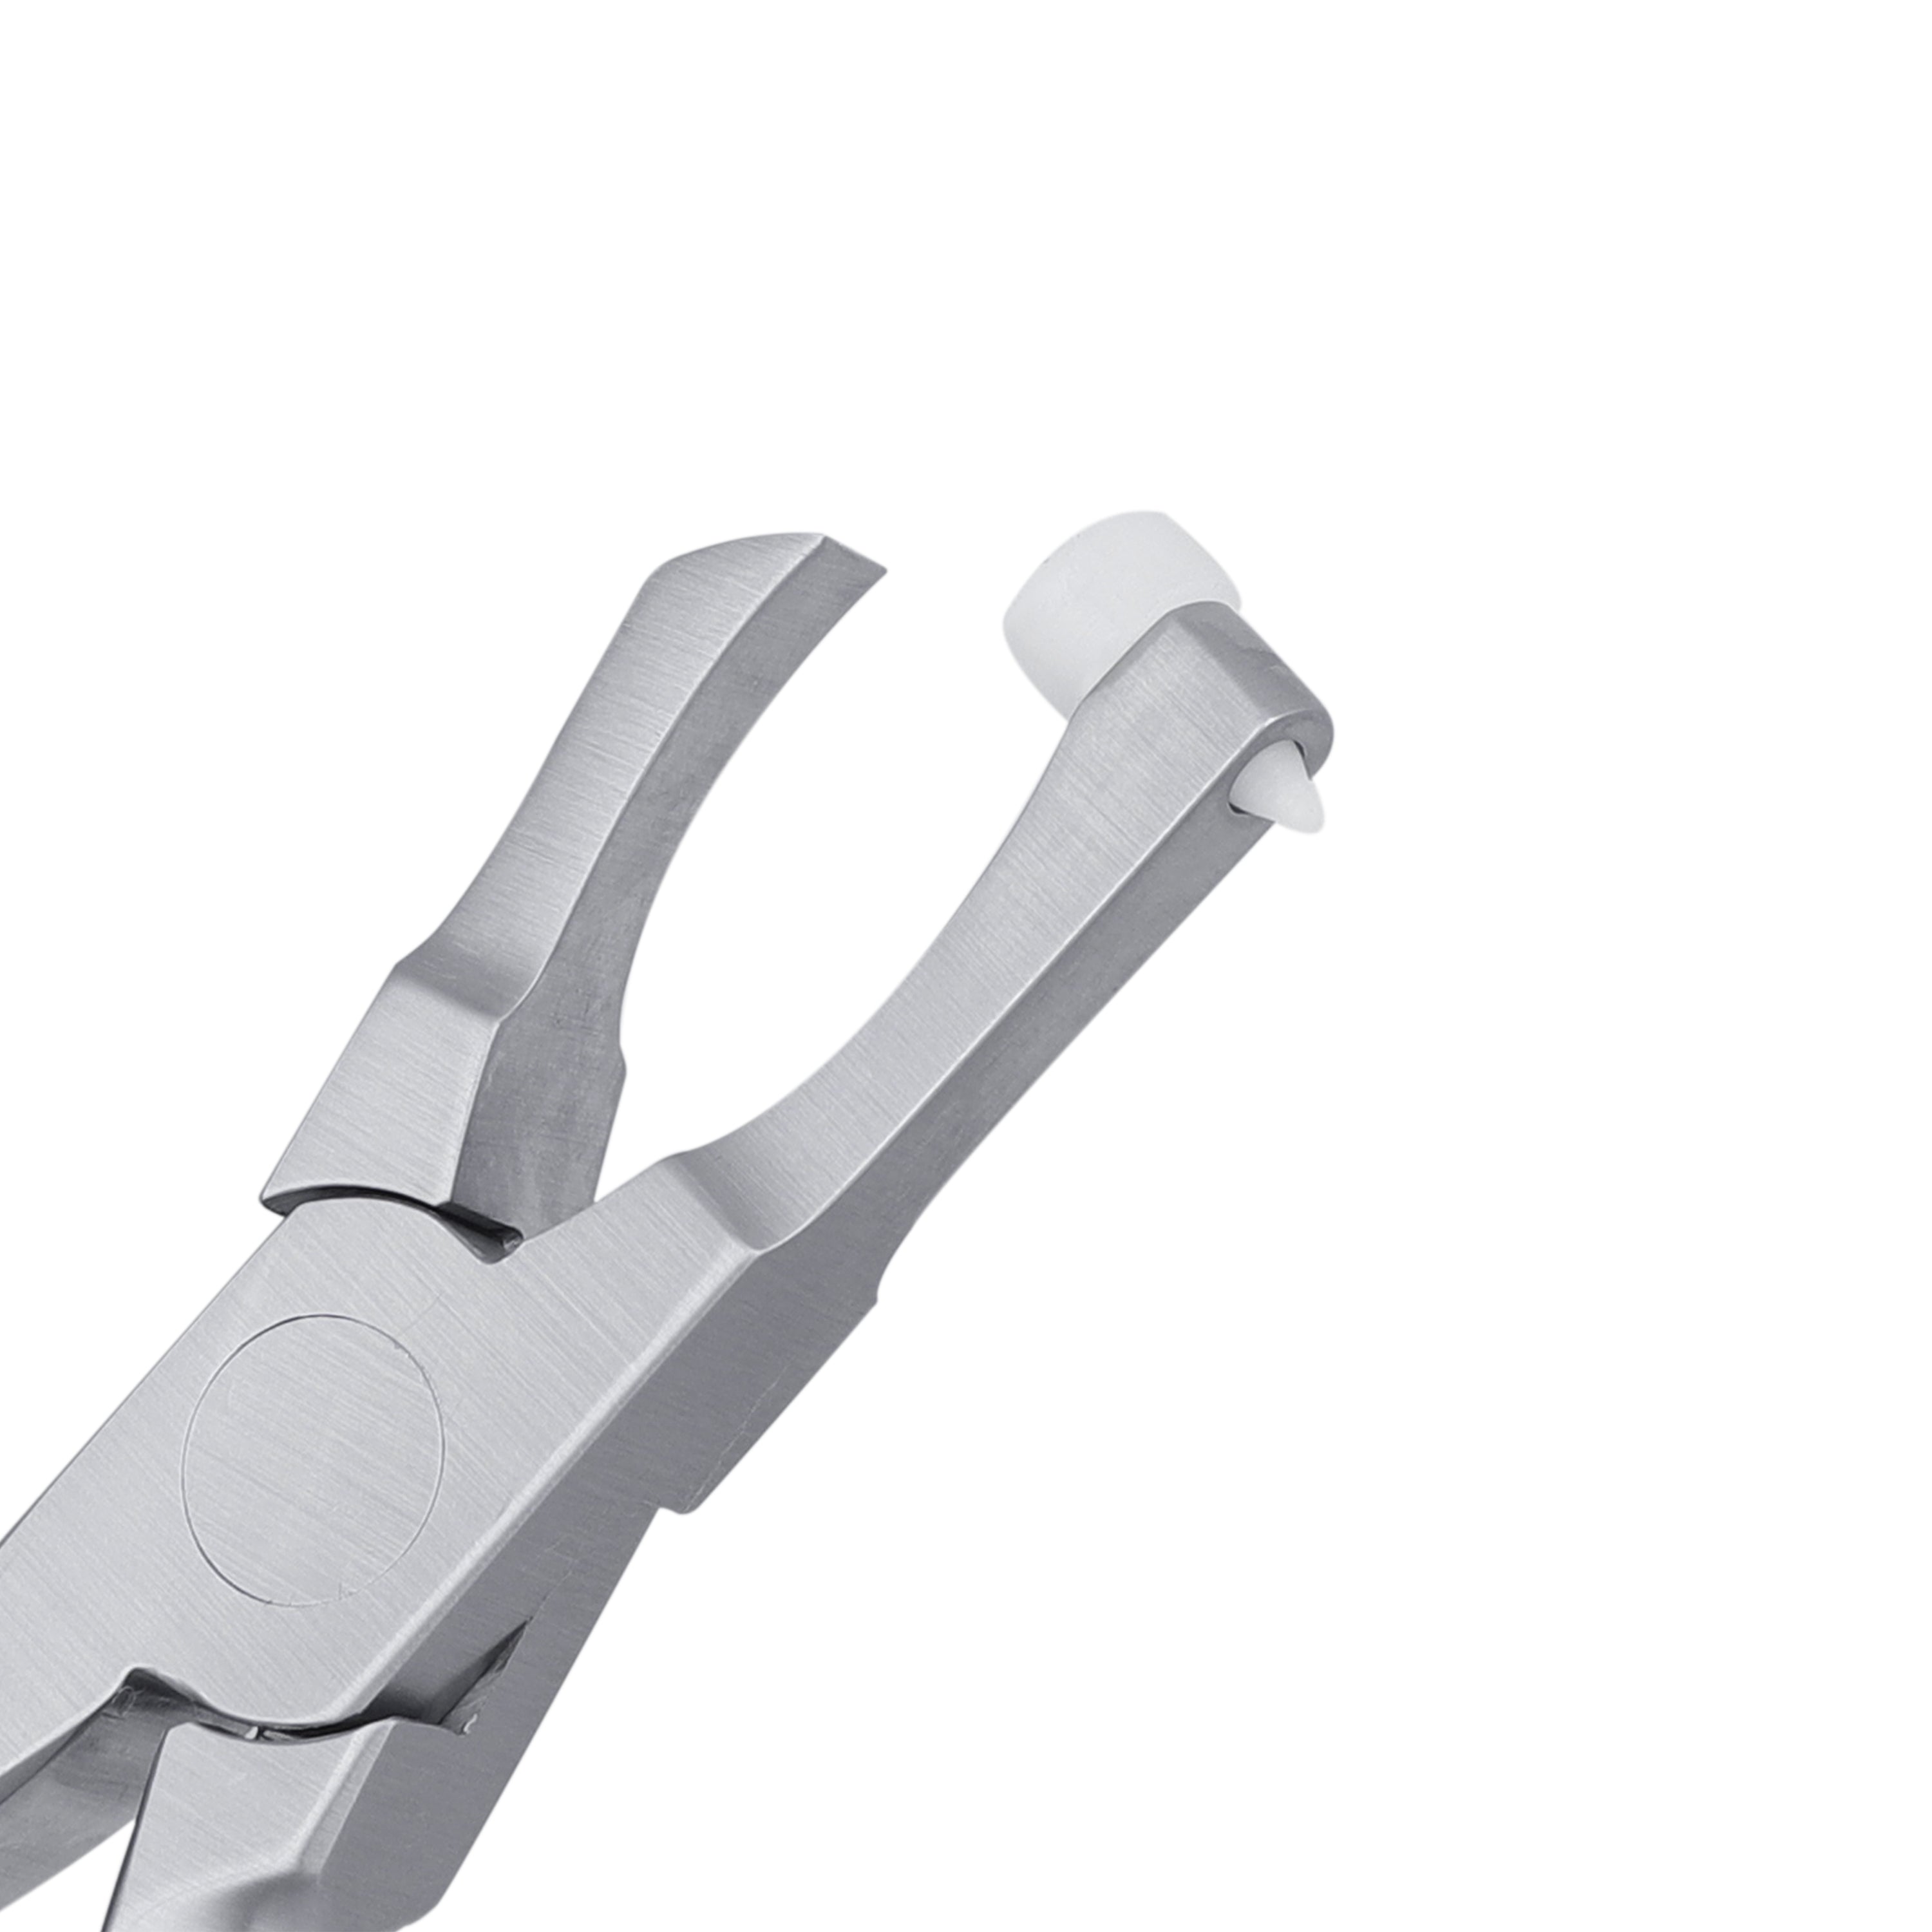 Posterior Band Removing Pliers, Short - HiTeck Medical Instruments